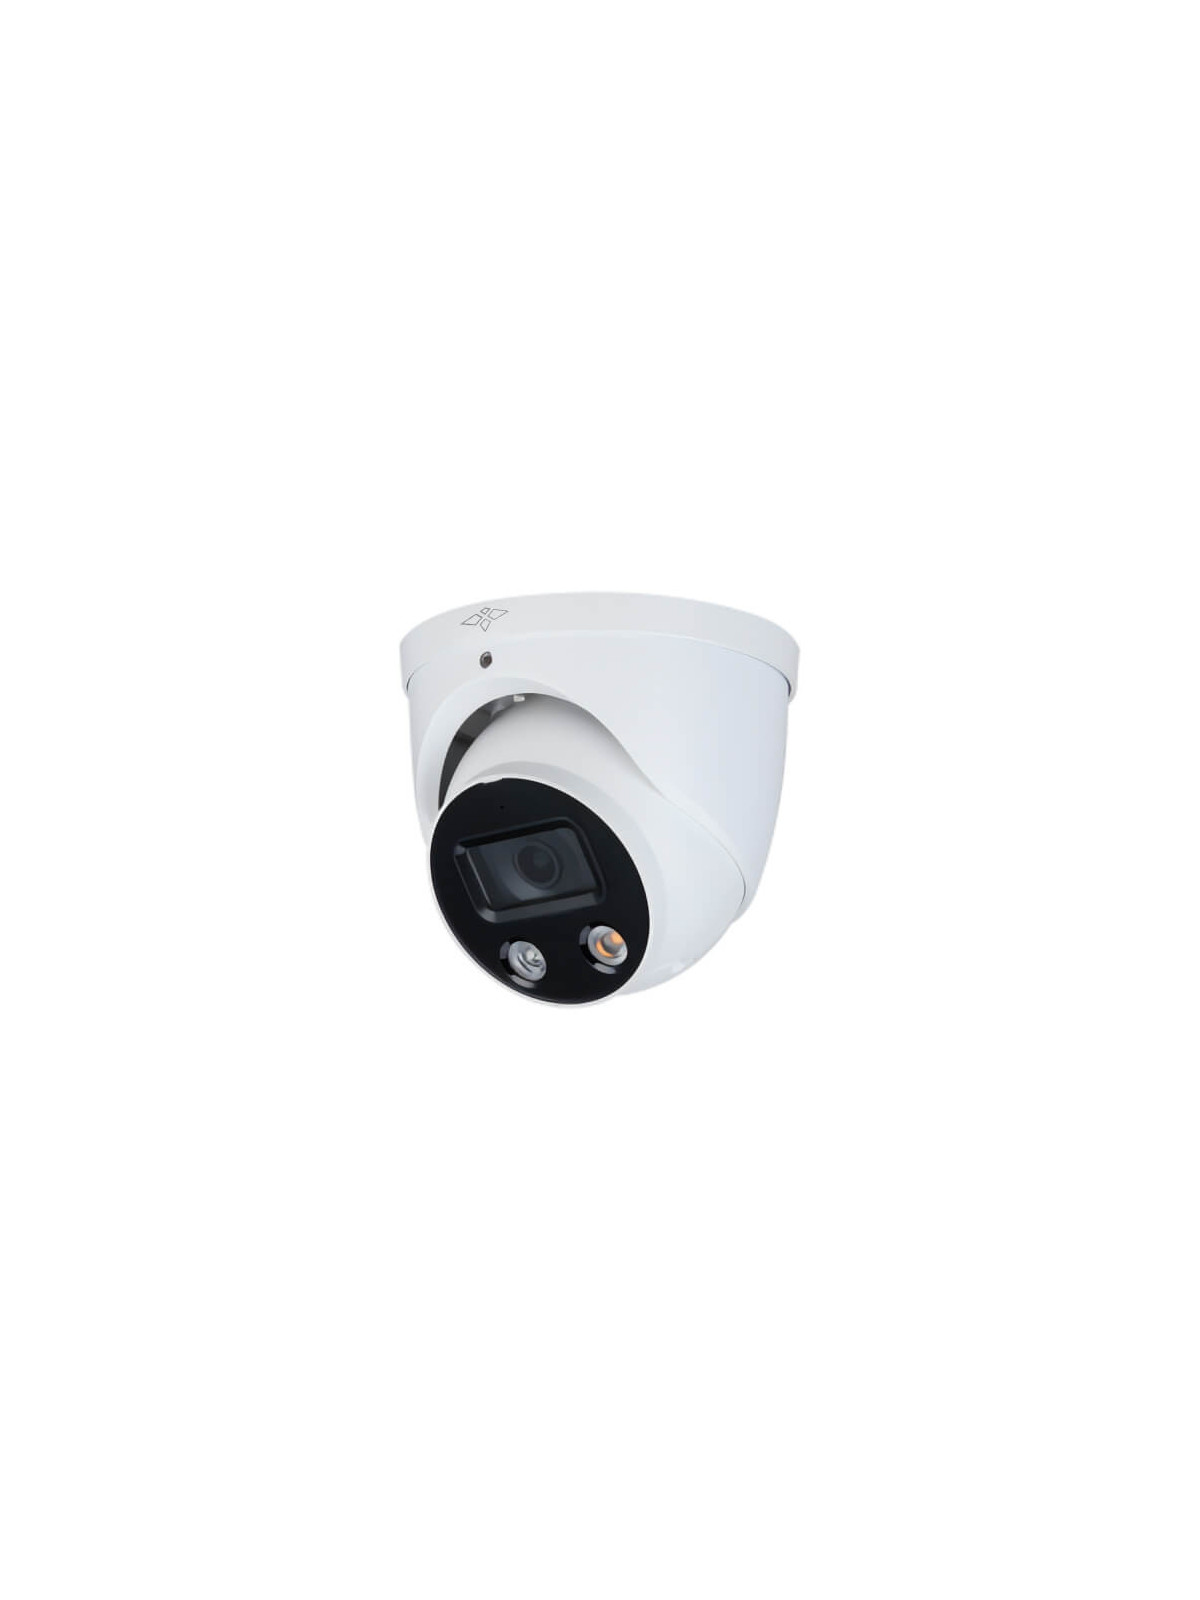 Domo IP X-Security XS-IPD744CWA-4US-AI 4MP 0.003Lux 2.8mm H265+ POE SD WDR Audio